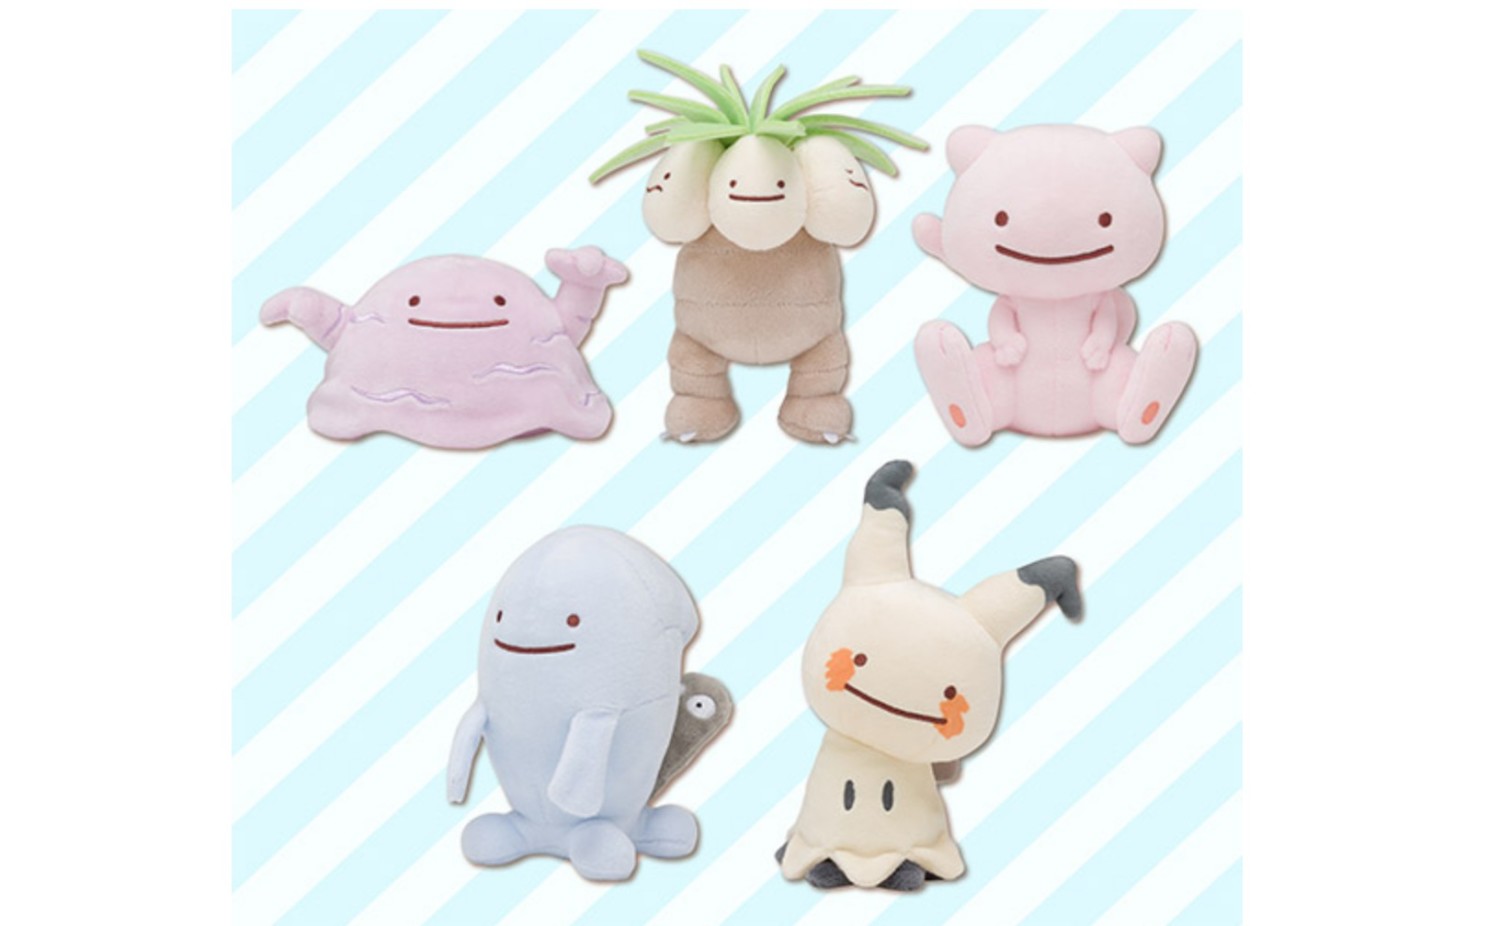 More Adorable Transform! Ditto Figurines Coming To Pokemon Centers –  NintendoSoup